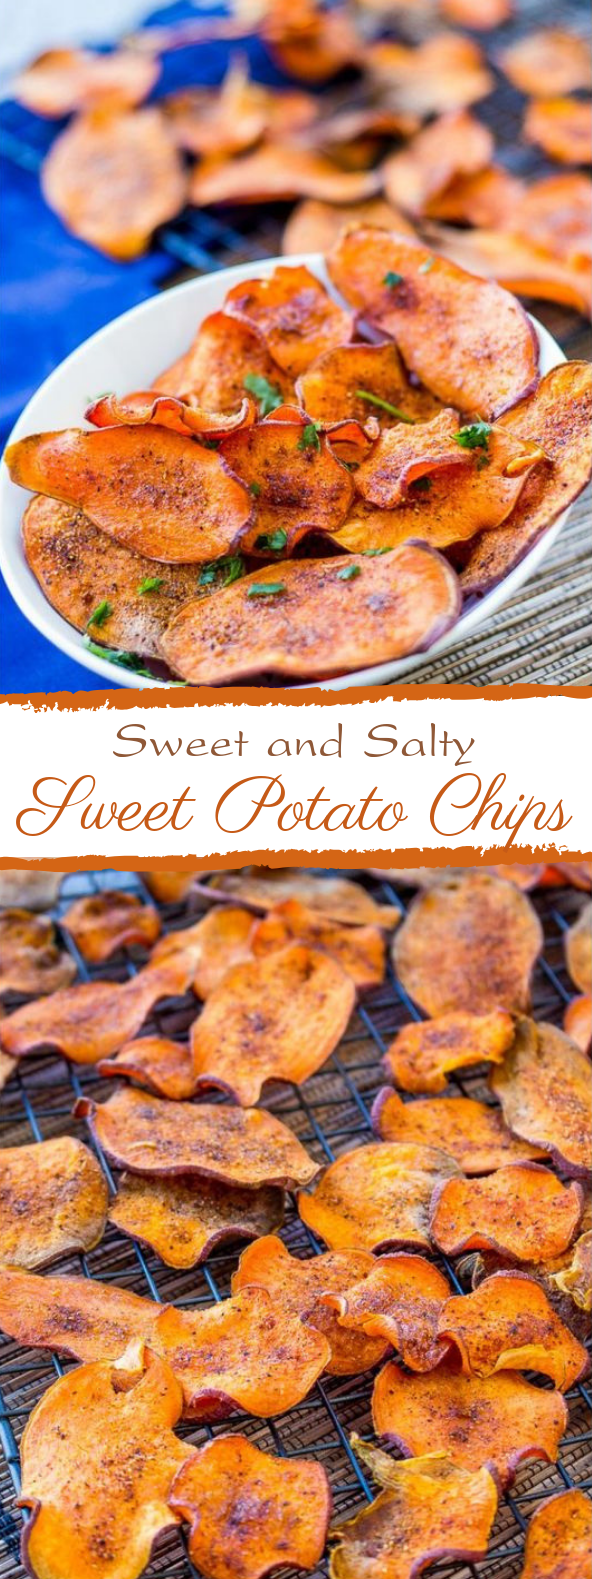 Sweet and Salty Sweet Potato Chips #snack #vegetarian